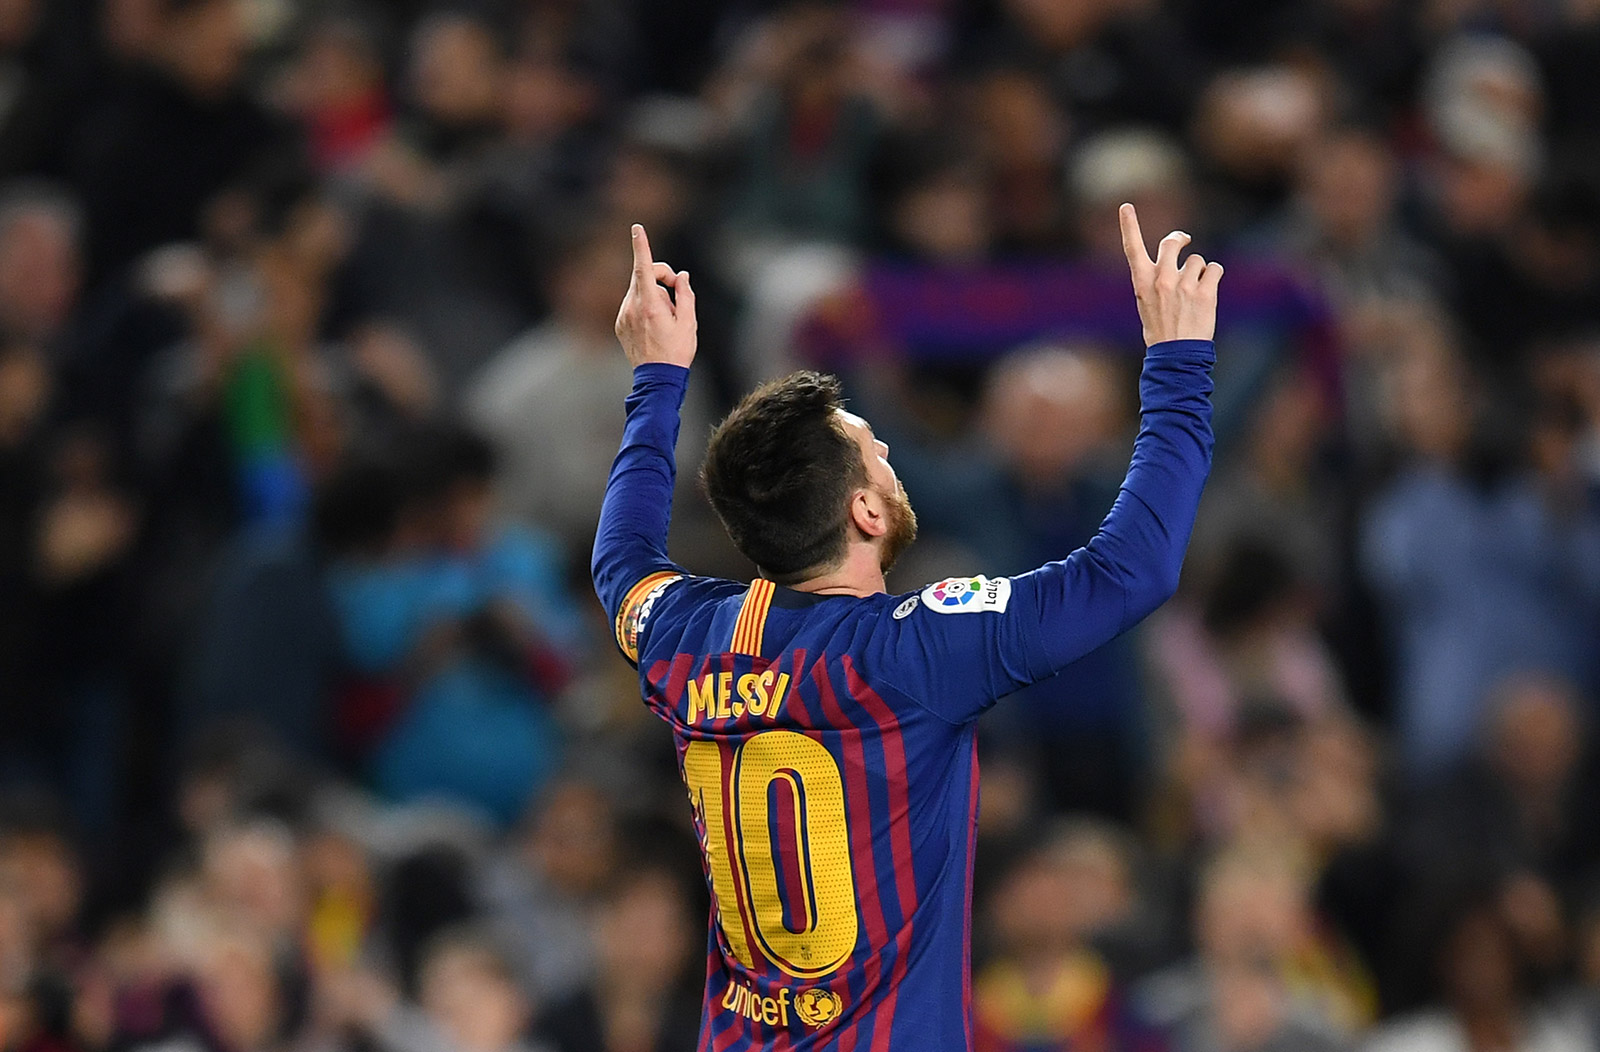 Lionel Messi: 20 defining moments from his career so far